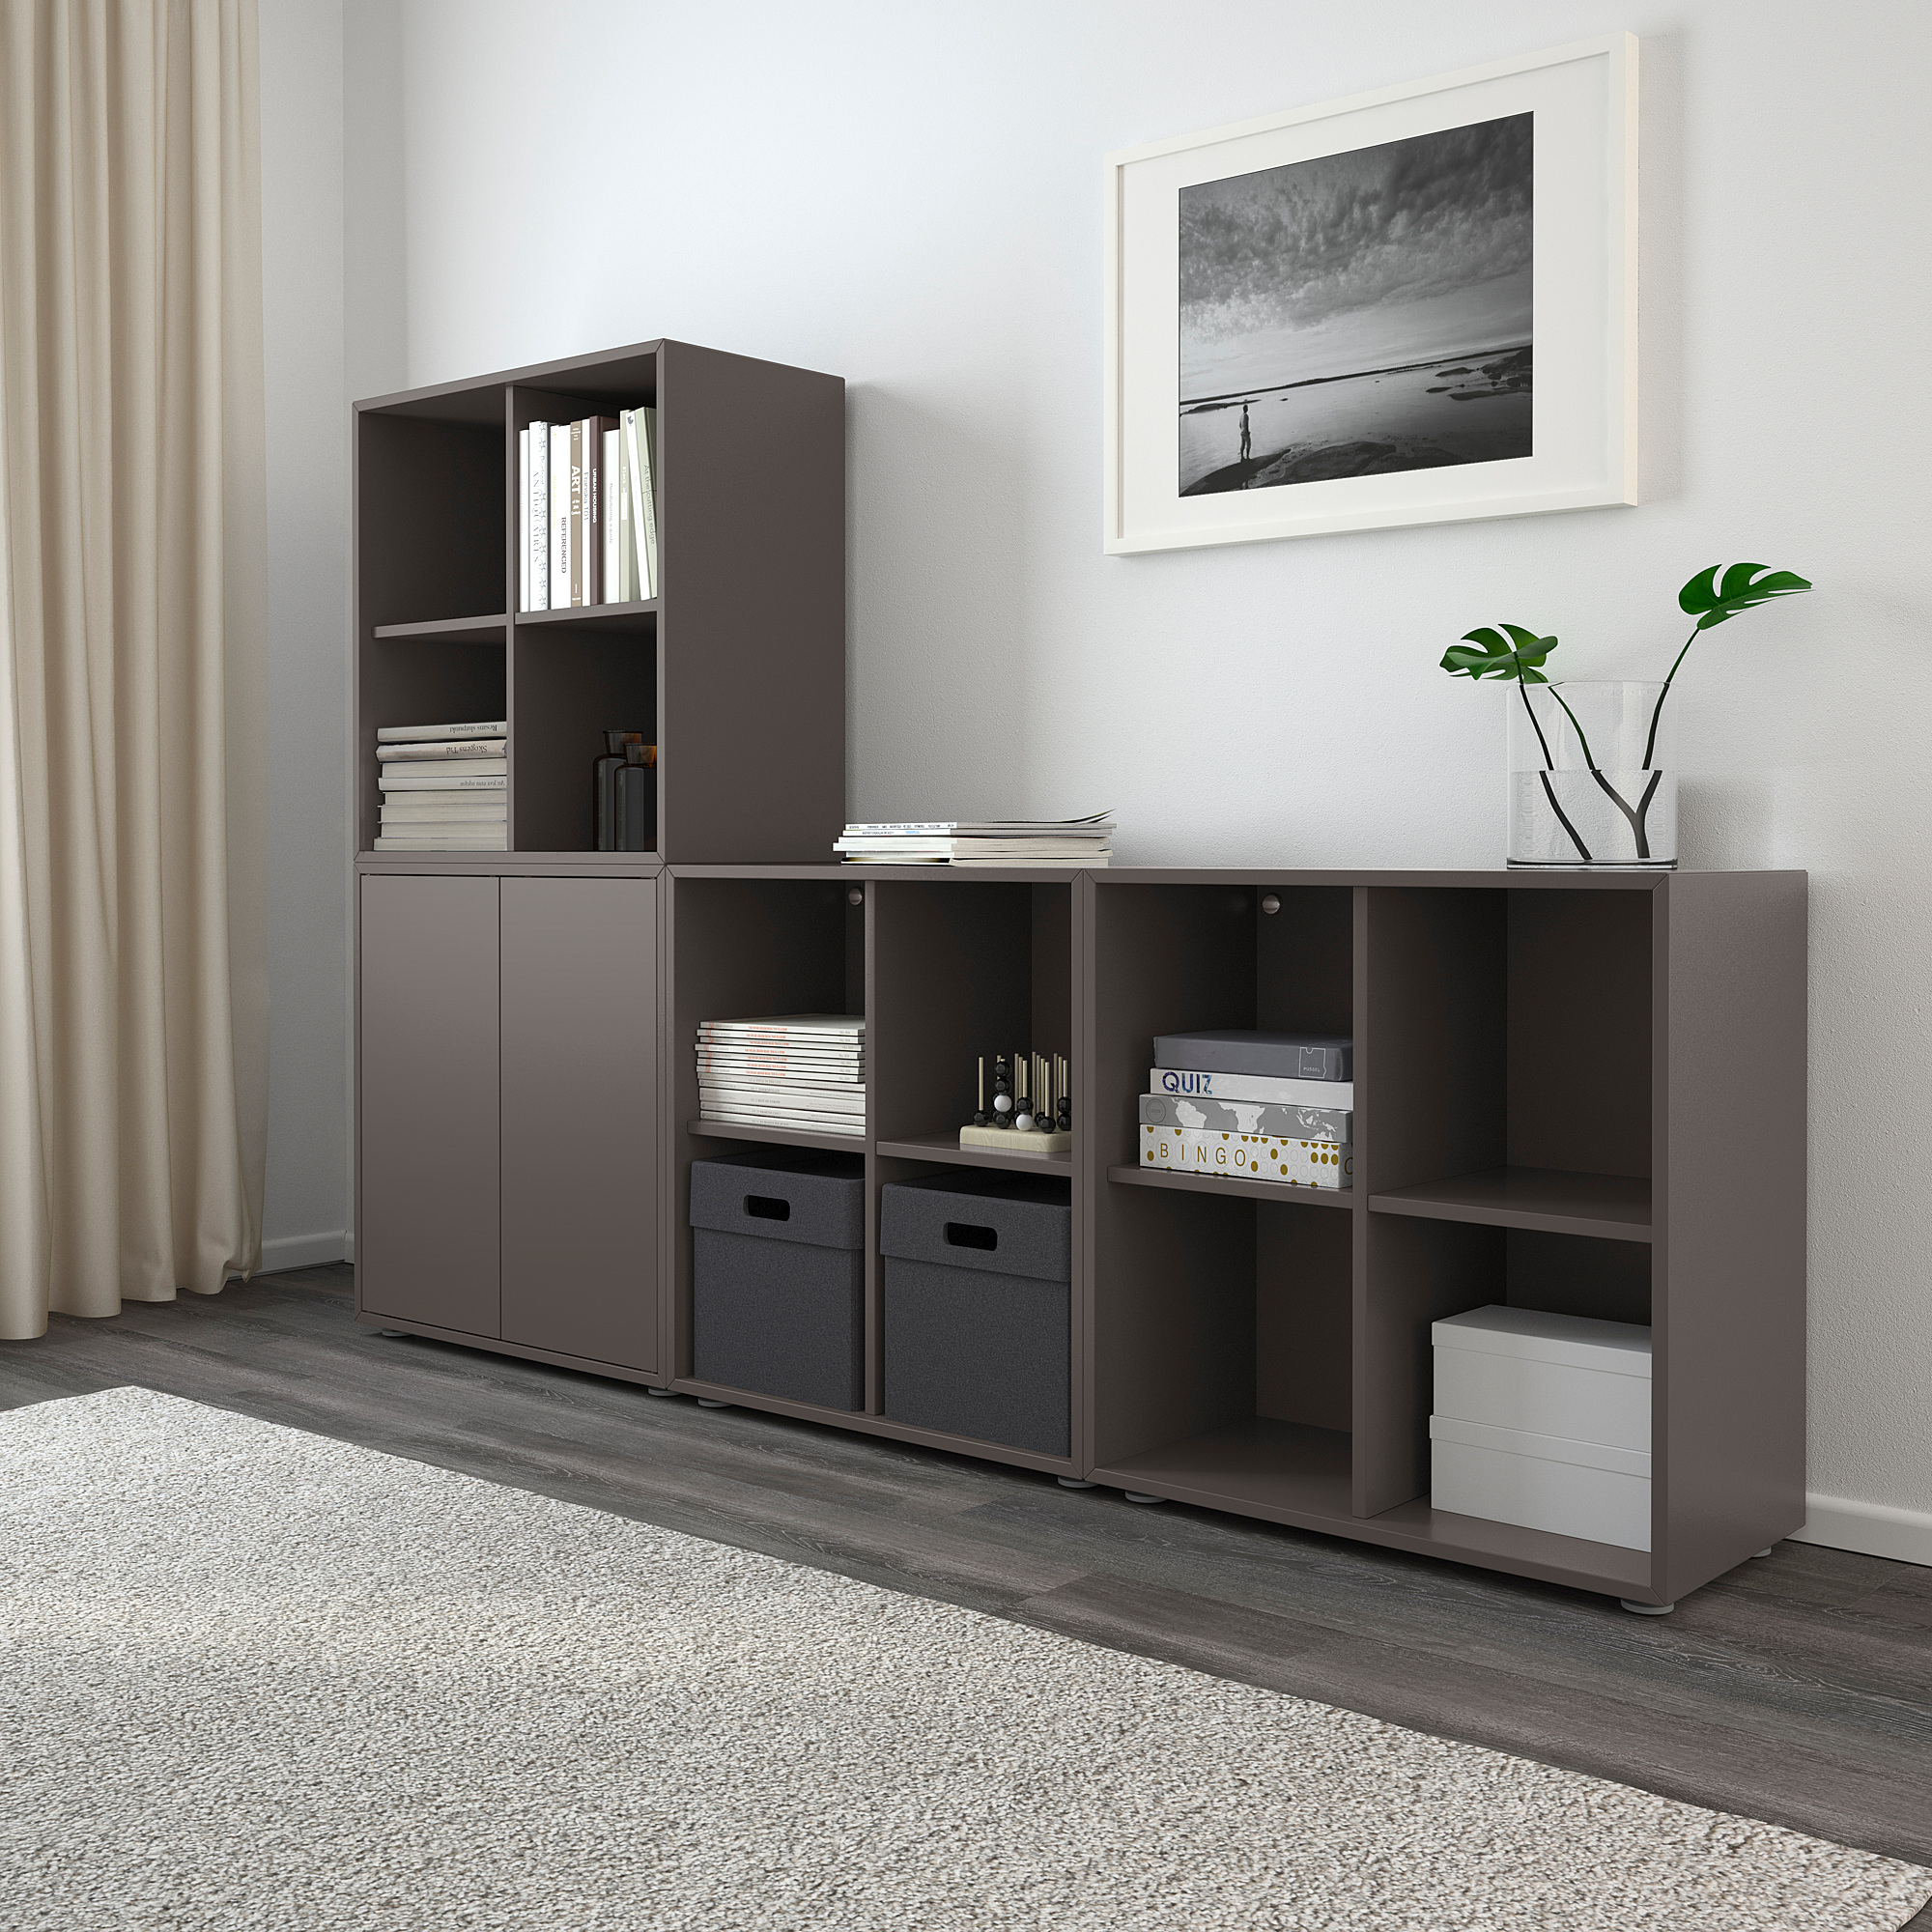 EKET cabinet with 4 compartments